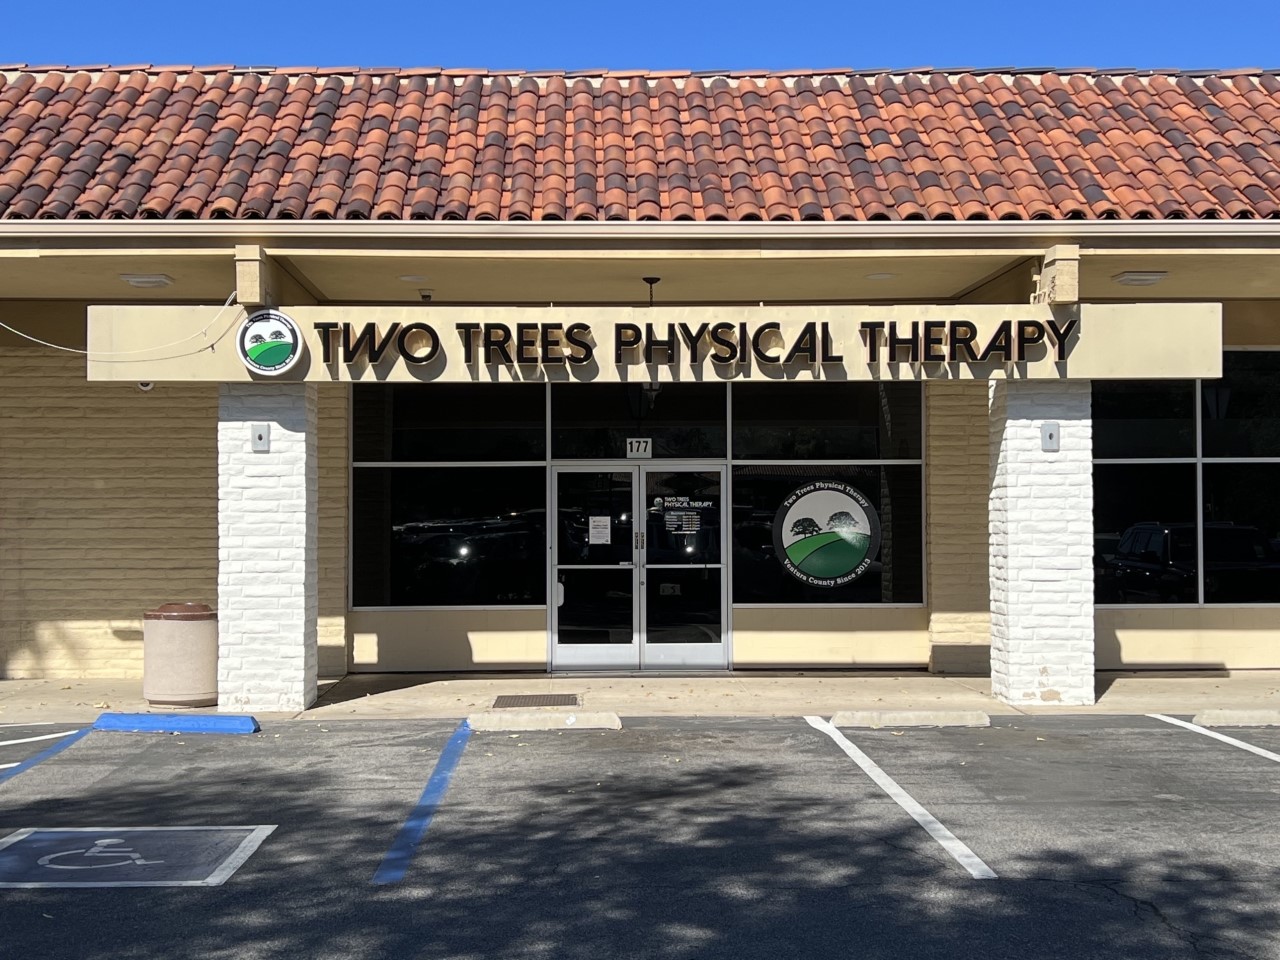 Entrance - Two Trees Physical Therapy Newbury Park